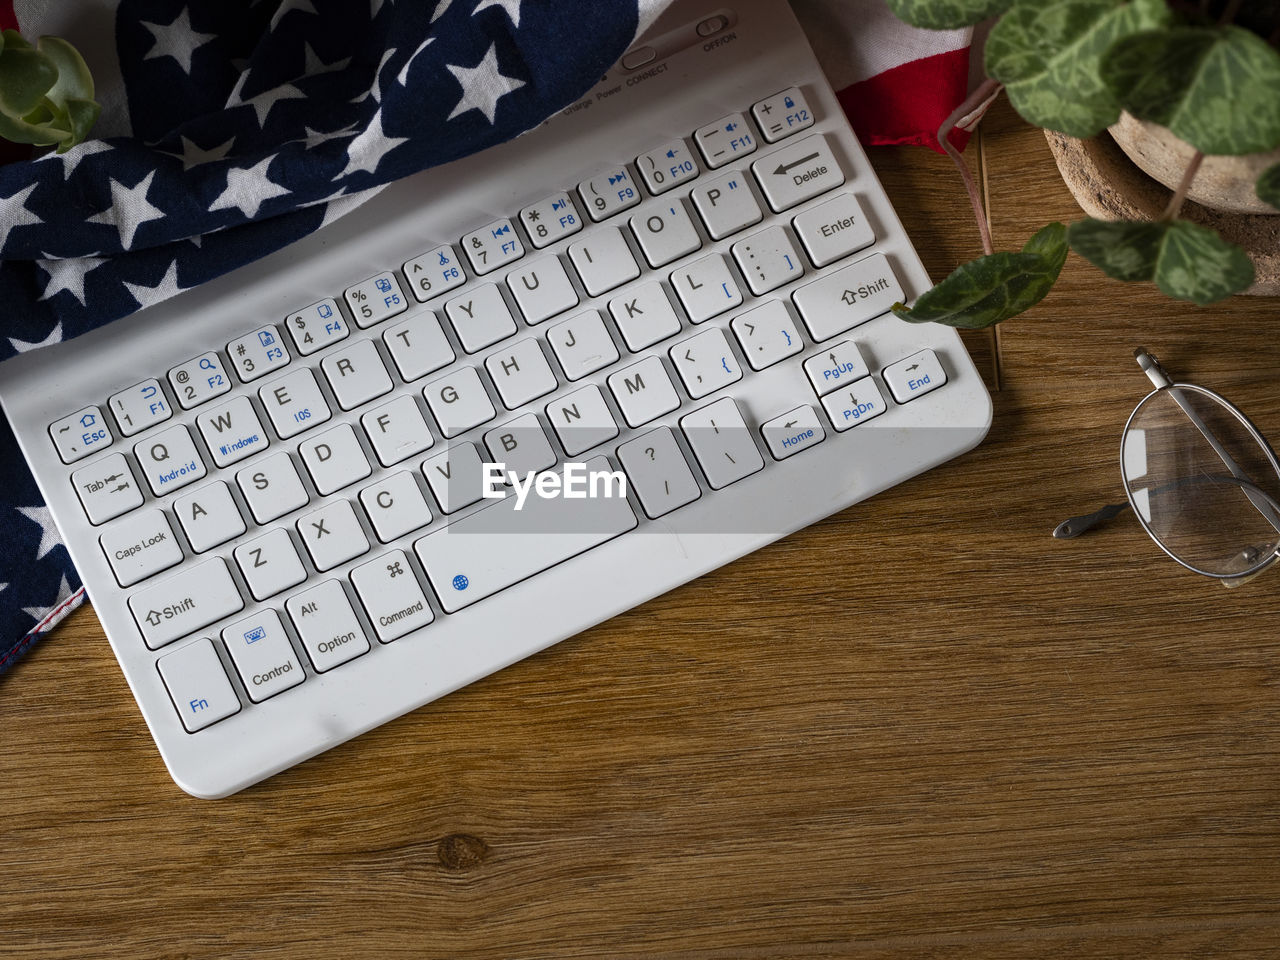 Flat lay photo of computer keyboard, us flag, eyeglasses and greenery on wooden table